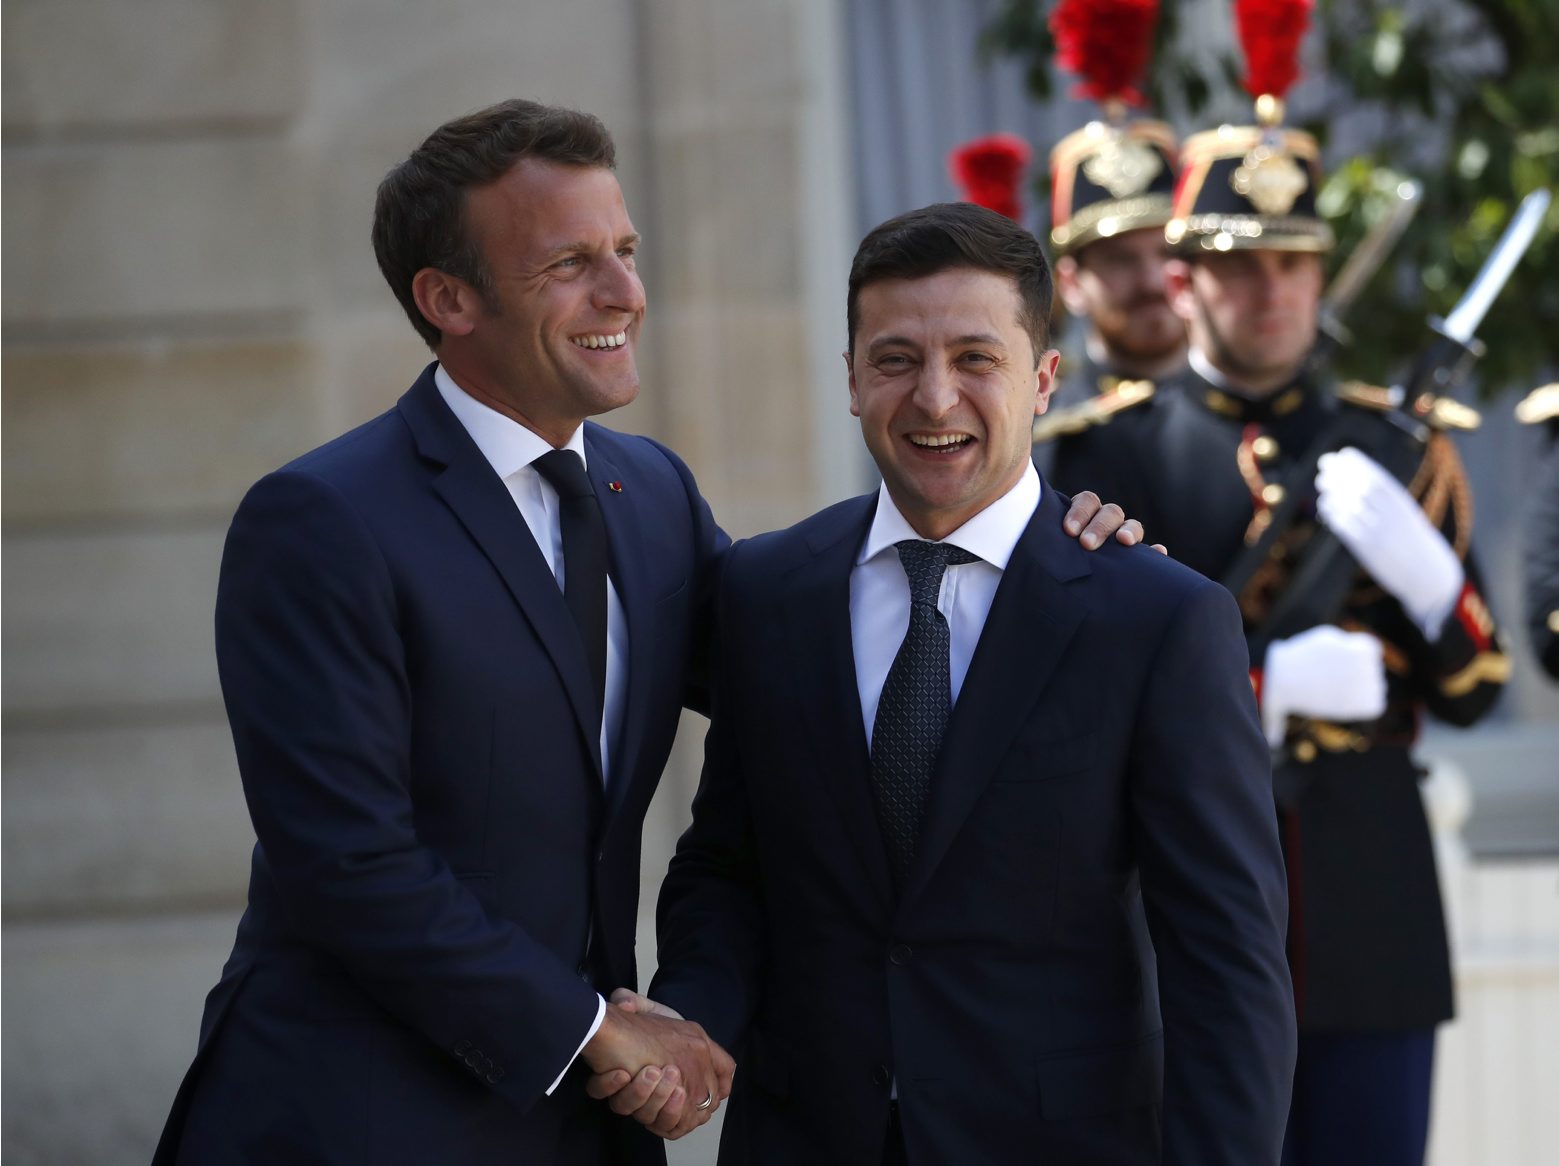 FILE In this file photo taken on Monday, June 17, 2019, French President Emmanuel Macron, right, greets Ukrainian President Volodymyr Zelenskiy before a meeting at the Elysee Palace, in Paris, France. Ukraine's president sits down Monday, Dec. 9, 2019 for peace talks in Paris with Russian President Vladimir Putin in their first face-to-face meeting, and the stakes could not be higher. More than five years of fighting in eastern Ukraine between government troops and Moscow-backed separatists has killed more than 14,000 people, and a cease-fire has remained elusive. (AP Photo/Christophe Ena, File) Ukraine's Challenges